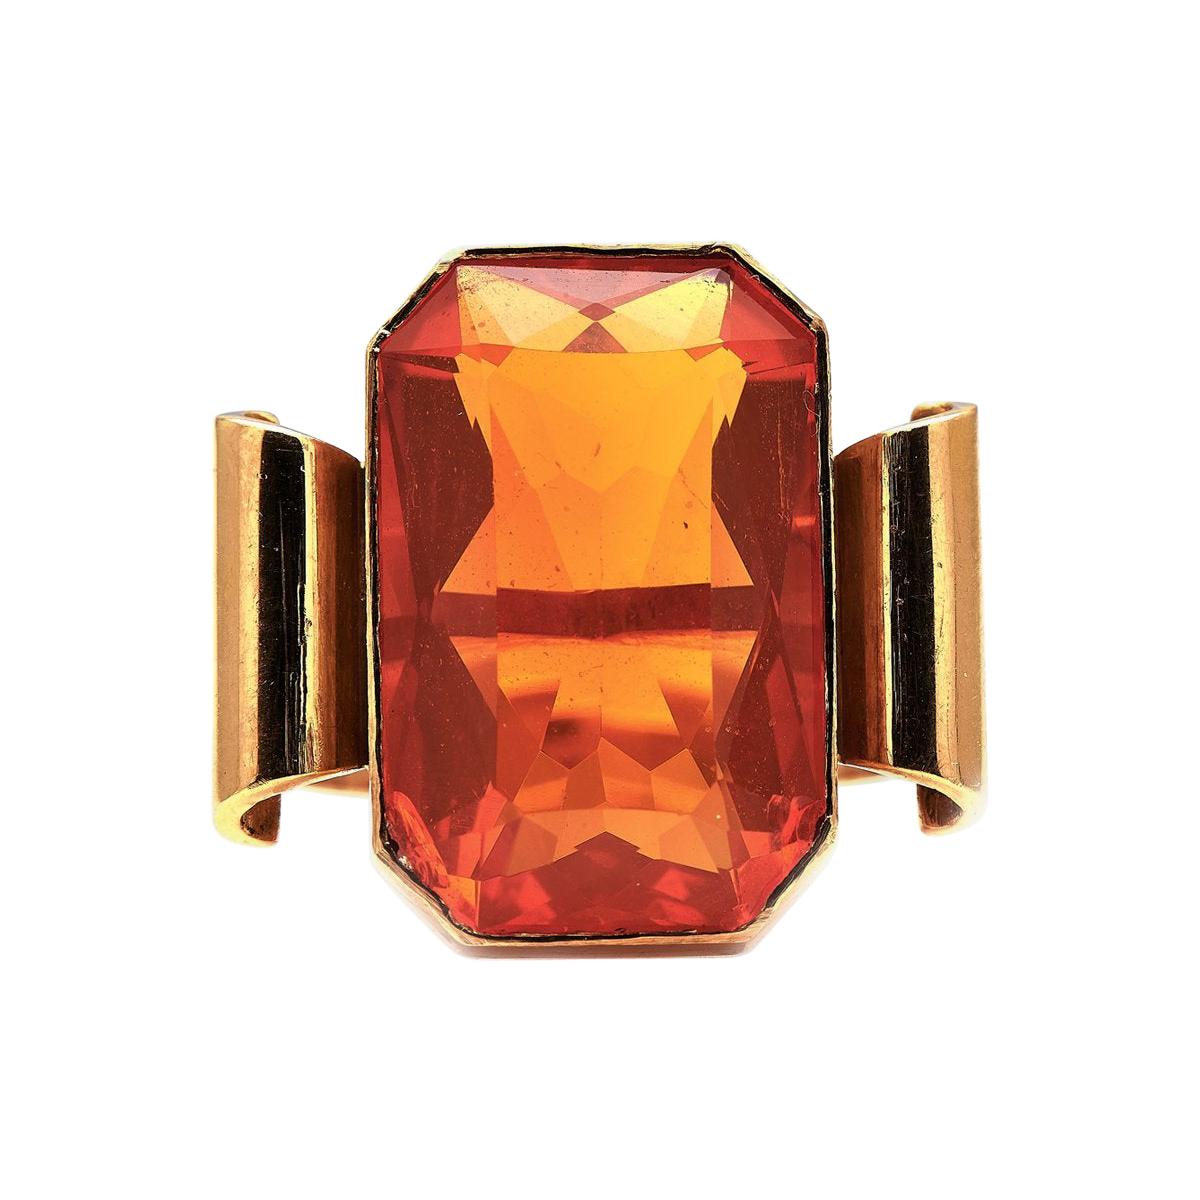 Antique, Mid Century, 1940s, 18ct Gold, French, Fire Opal Ring